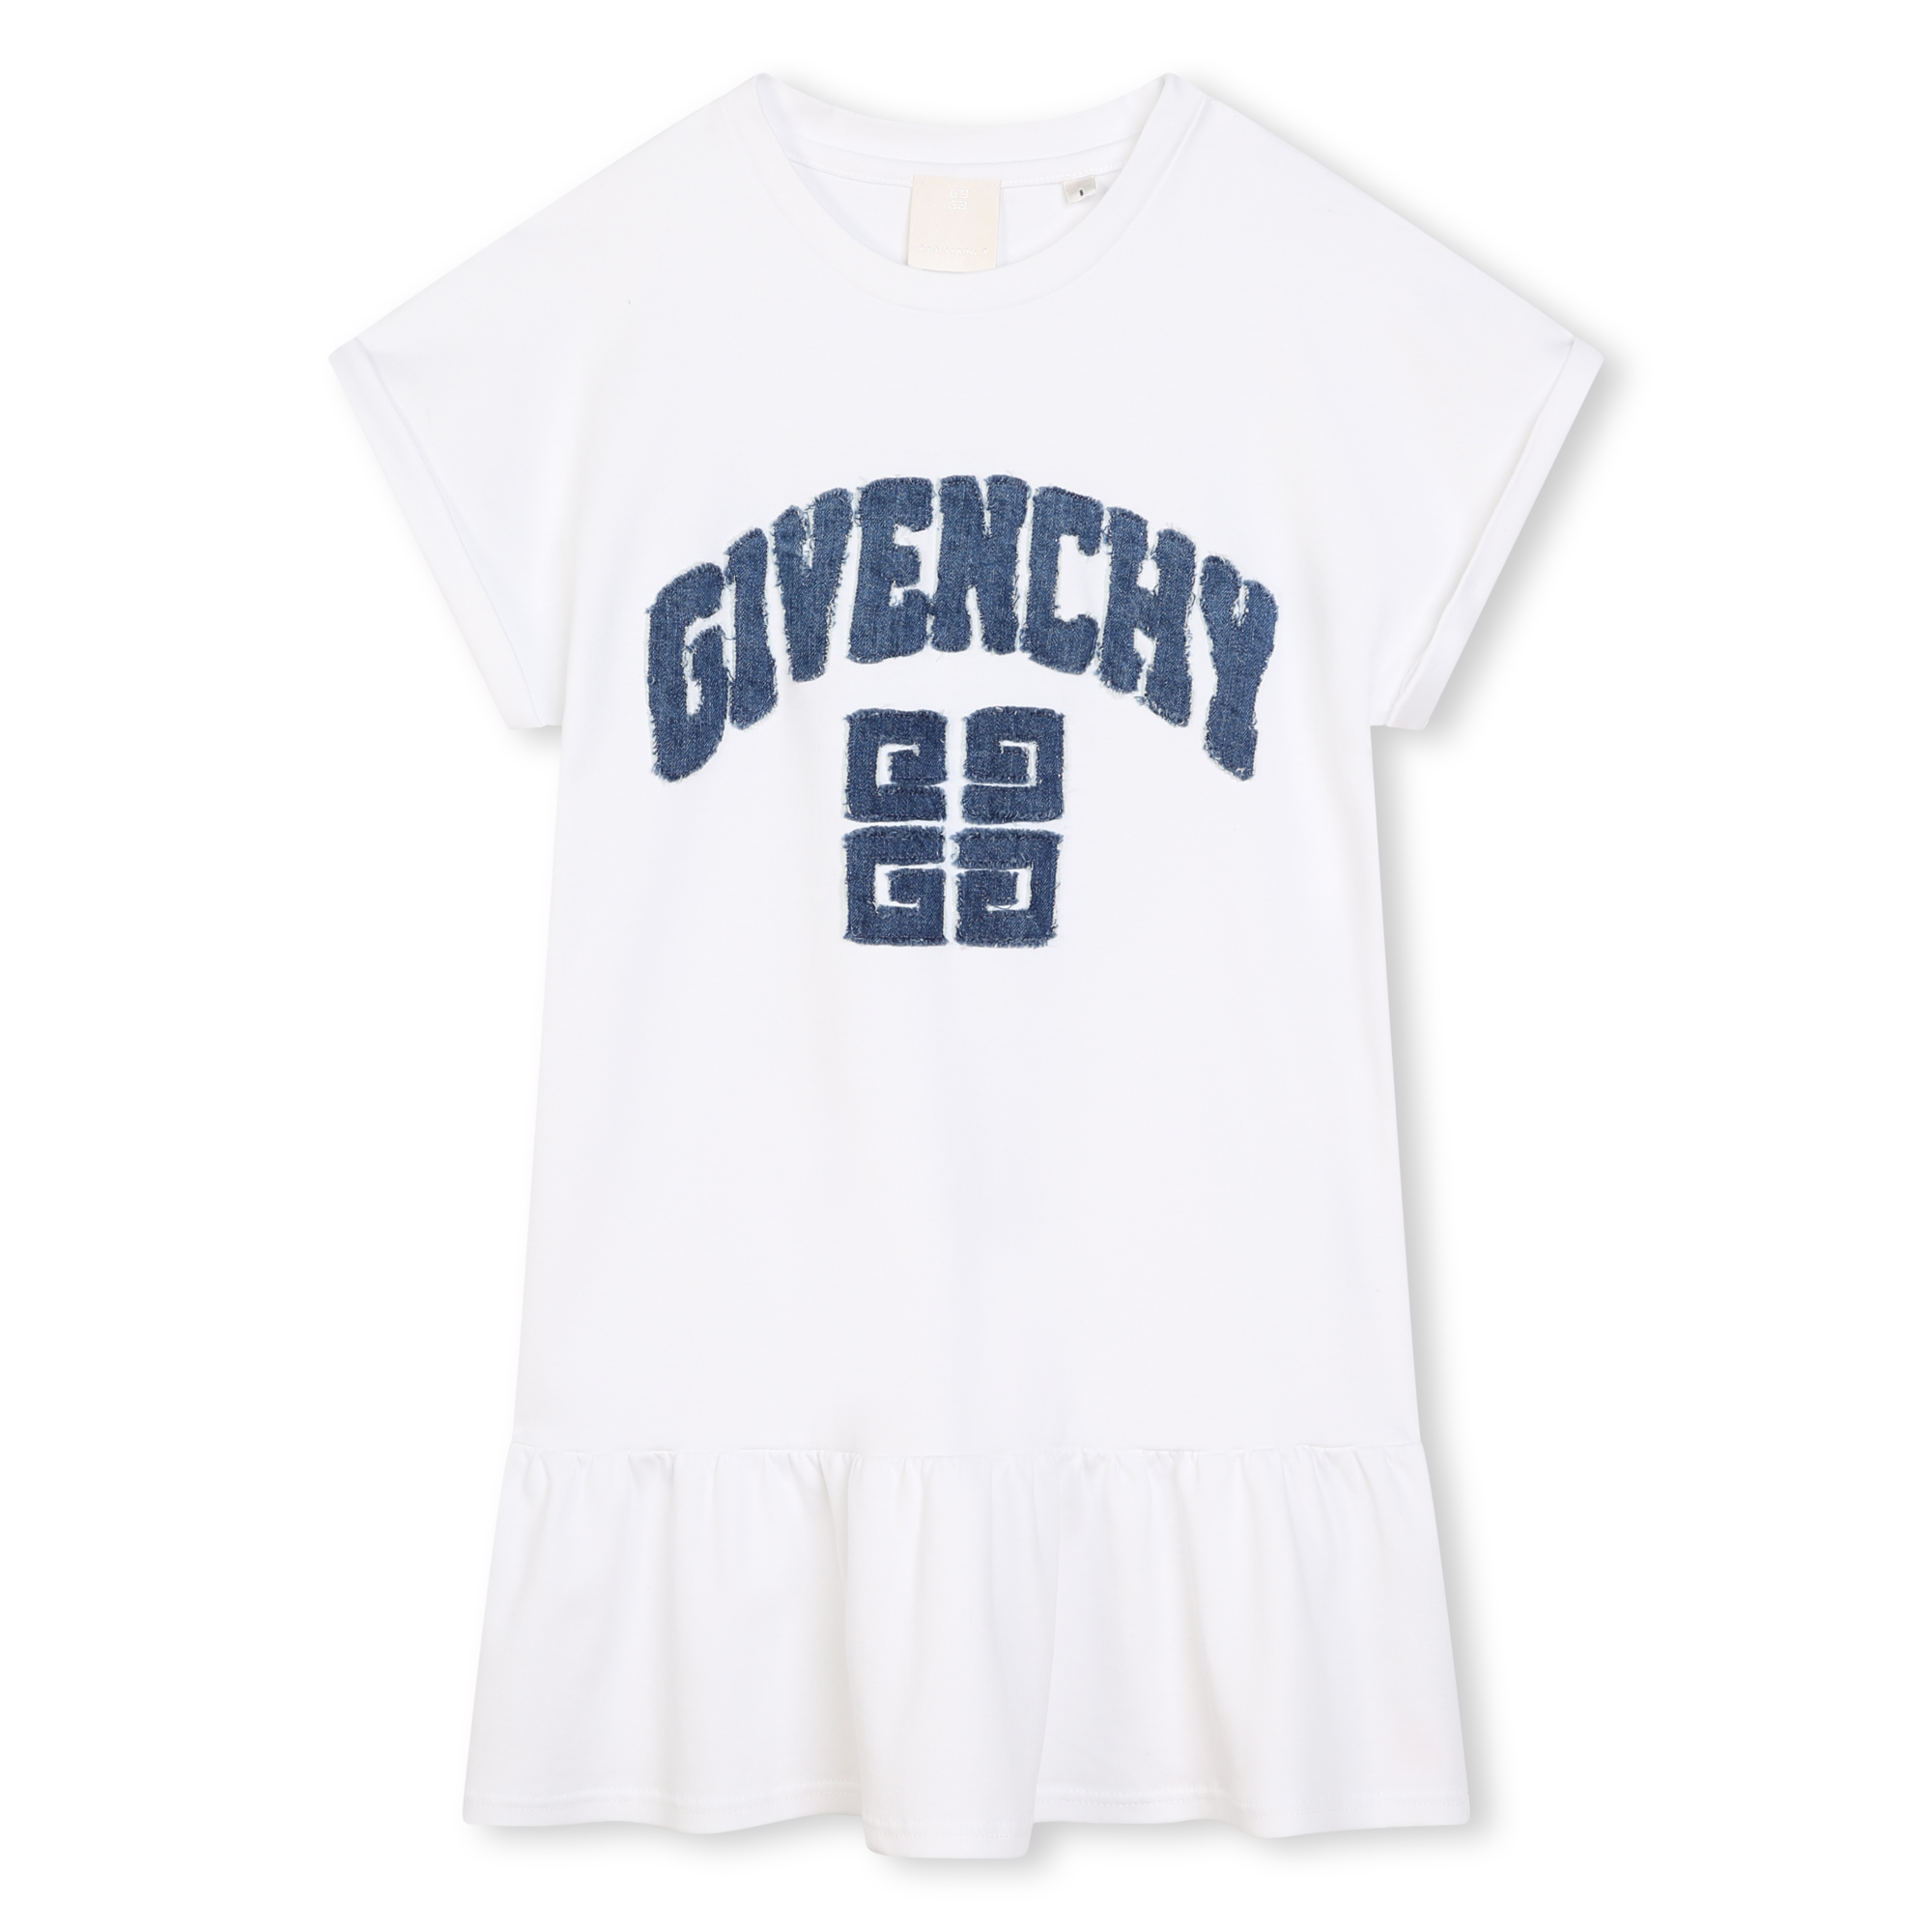 Cotton dress with frill GIVENCHY for GIRL